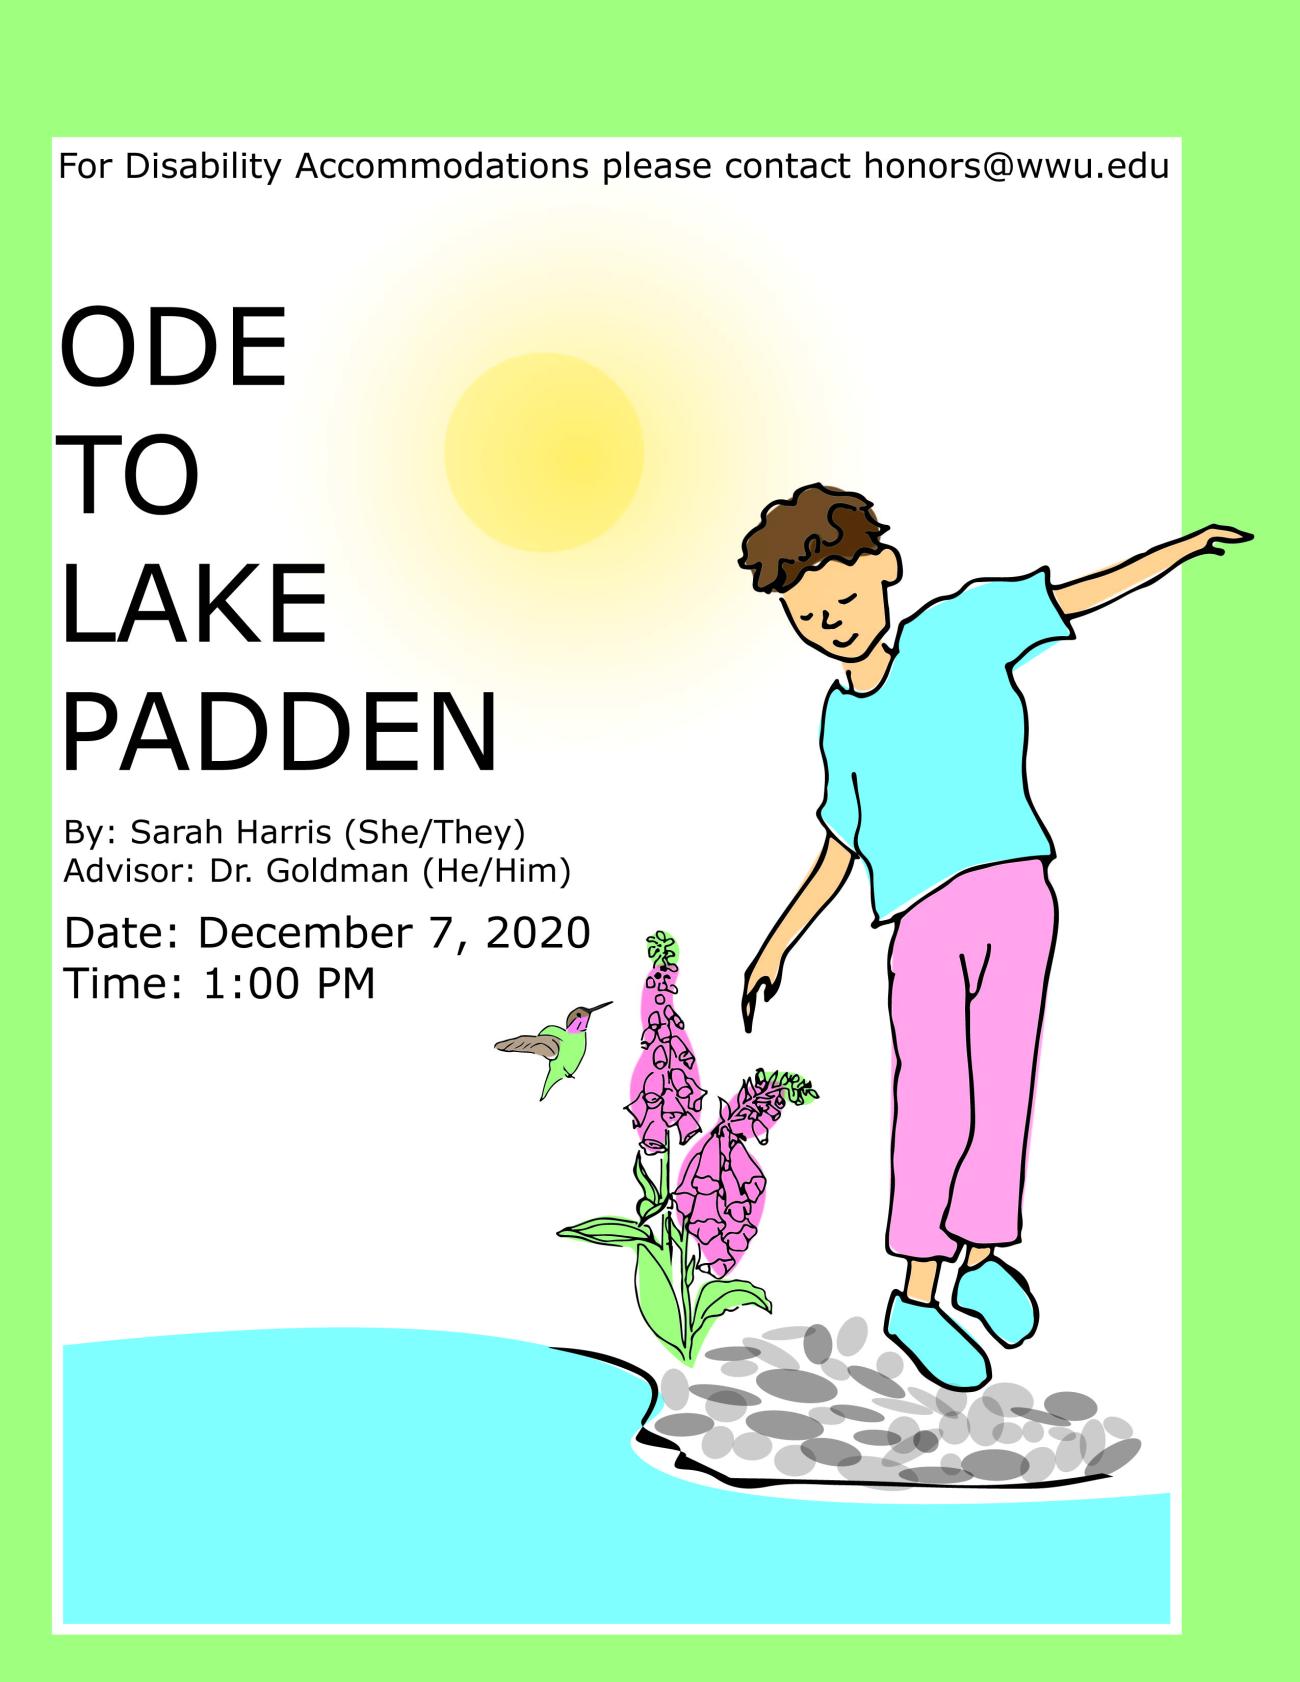 Image: Illustration of a kid in pastel pink pants and a light blue shirt gazing down at pink foxglove and a small hummingbird while standing on pebbles by the water. The sun shines next to the boy's shoulder. Text: "For Disability Accommodations please contact honors@wwu.edu. ODE TO LAKE PADDEN. By: Sarah Harris (She/They), Advisor: Dr. Goldman (He/Him). Date: December 7, 2020, Time: 1:00 PM."